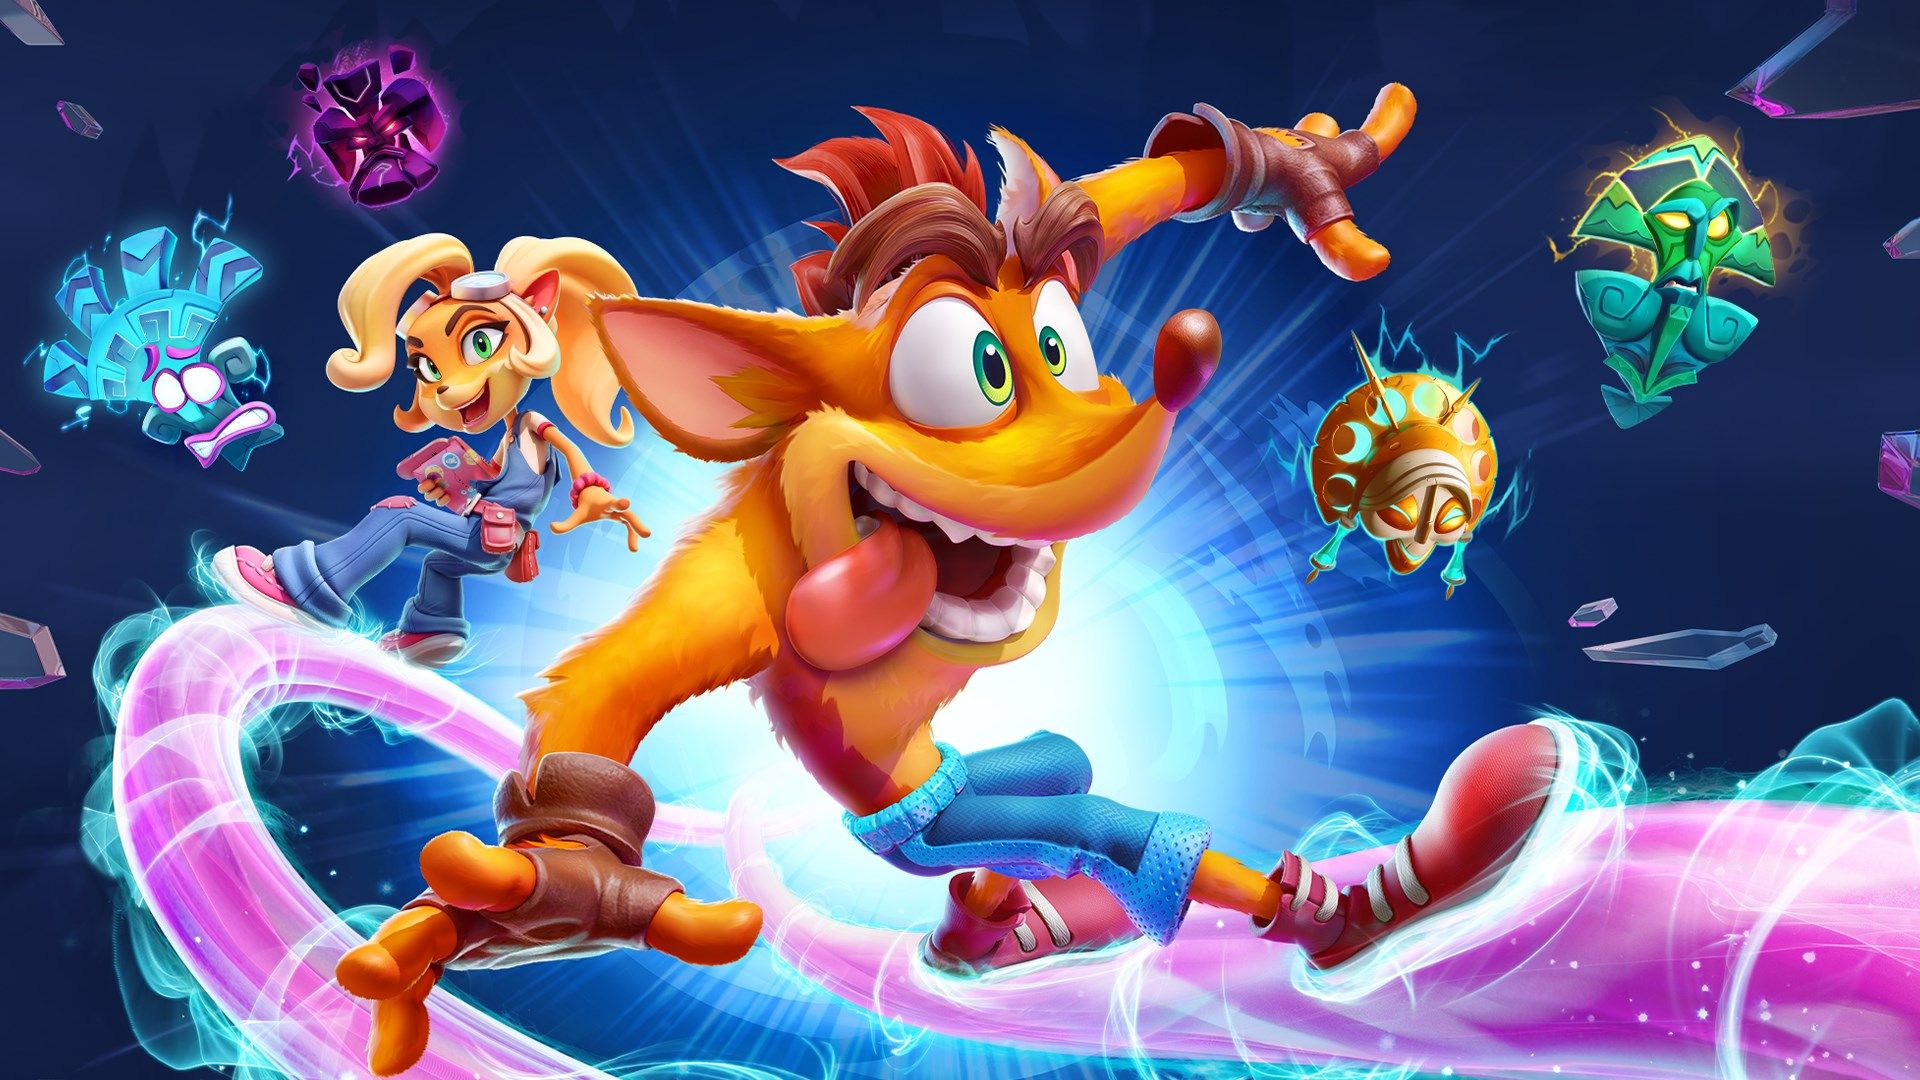 Crash Bandicoot 4: It's About Time reveal trailer shows playable Crash, Coco, & Cortex